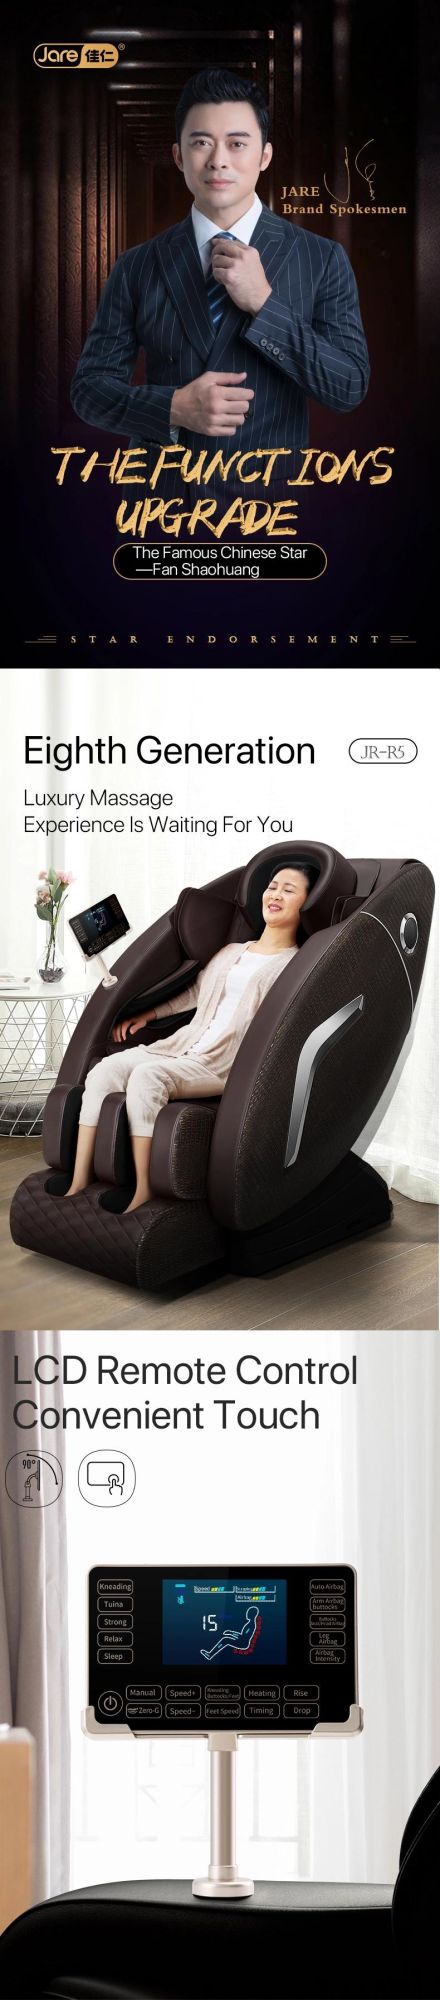 Luxury Cheap Office Electric OEM ODM Manufacturer Cheap Low Price Massage Chair for Home